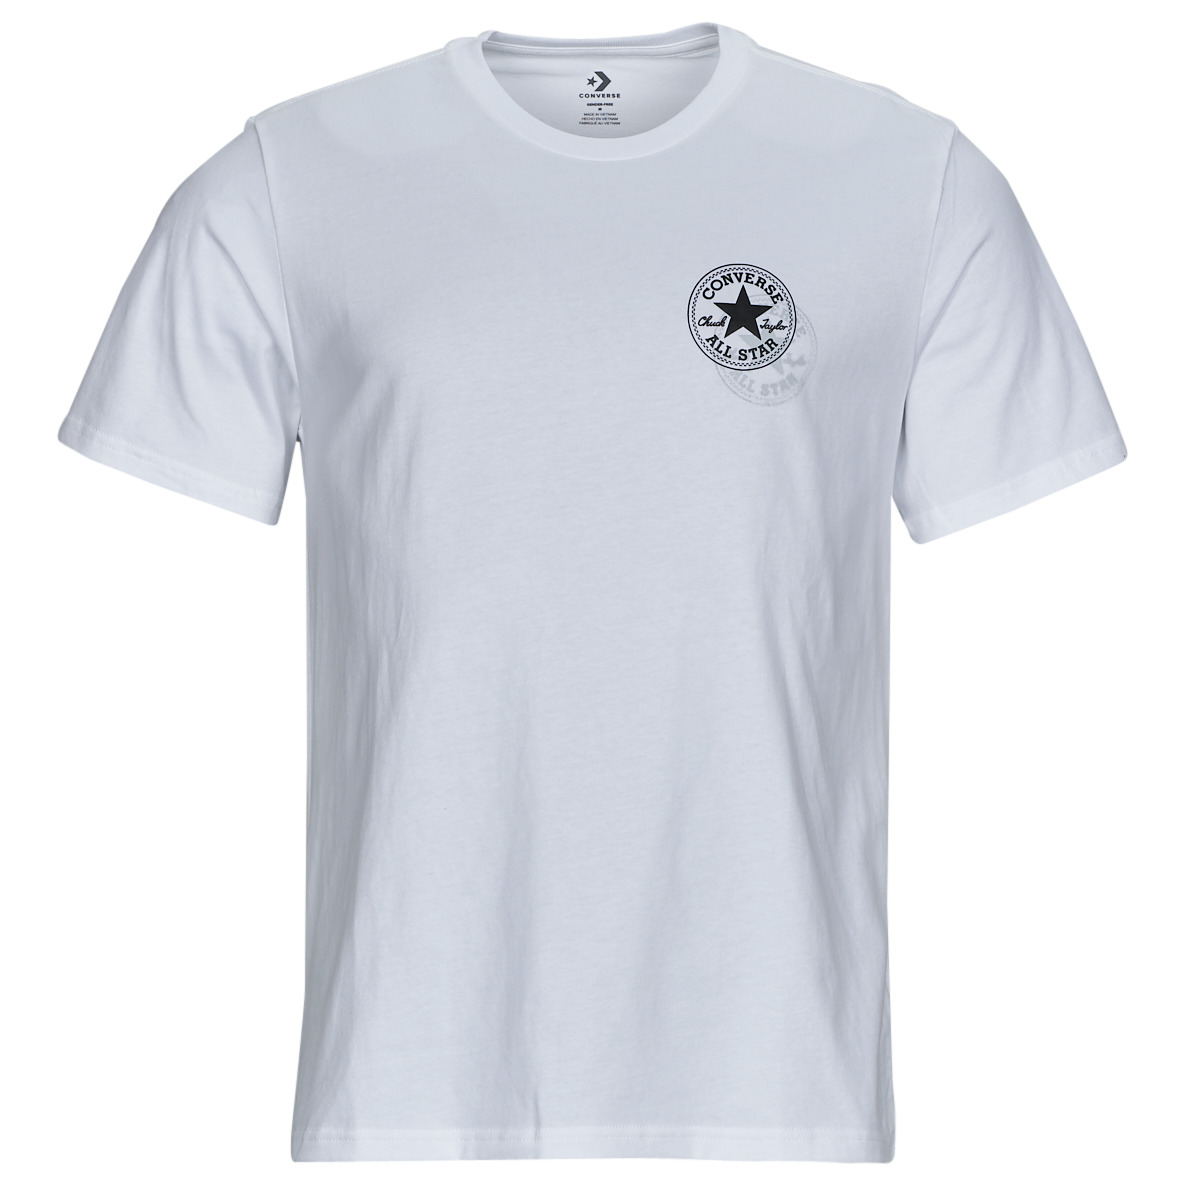 € PATCH Clothing | Converse Men delivery ALL Spartoo t-shirts 26,40 Fast ! STAR - - GO-TO White Europe short-sleeved